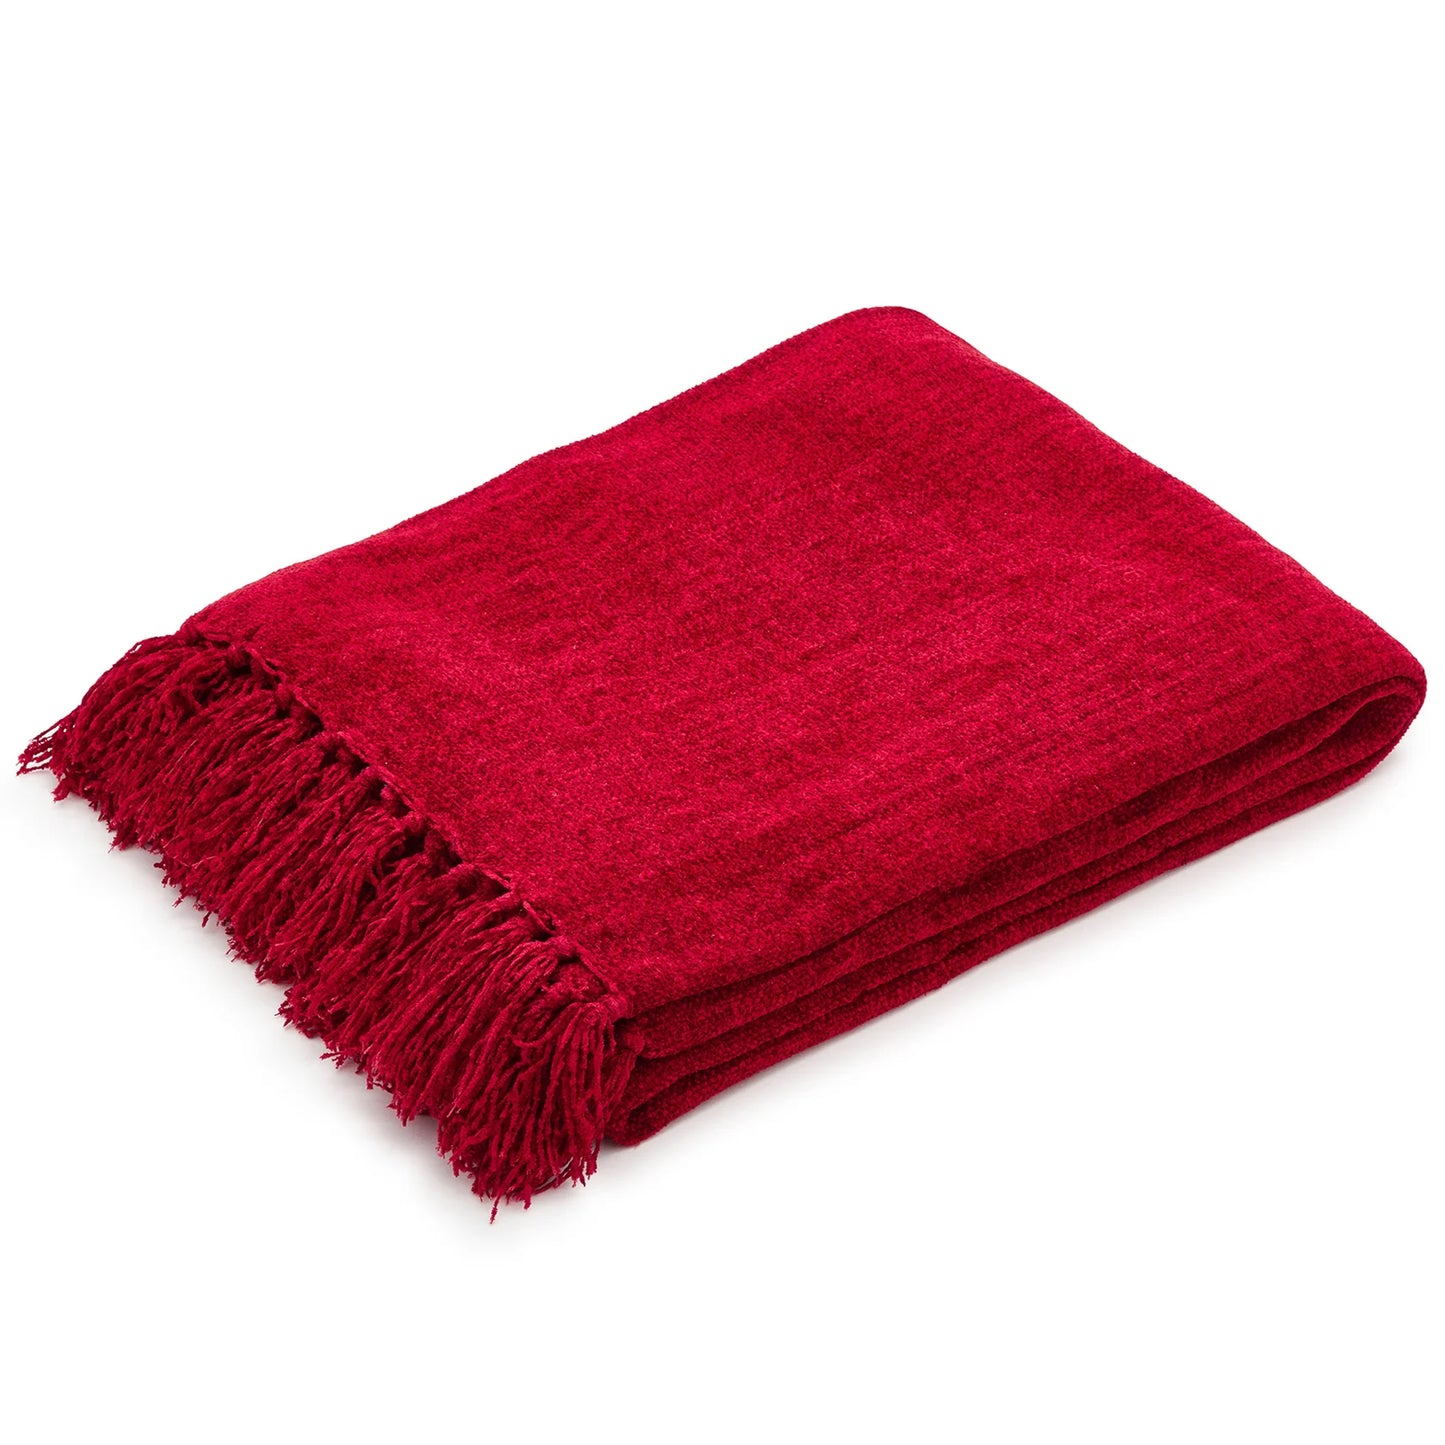 Chenille Throw Blanket by American Flat